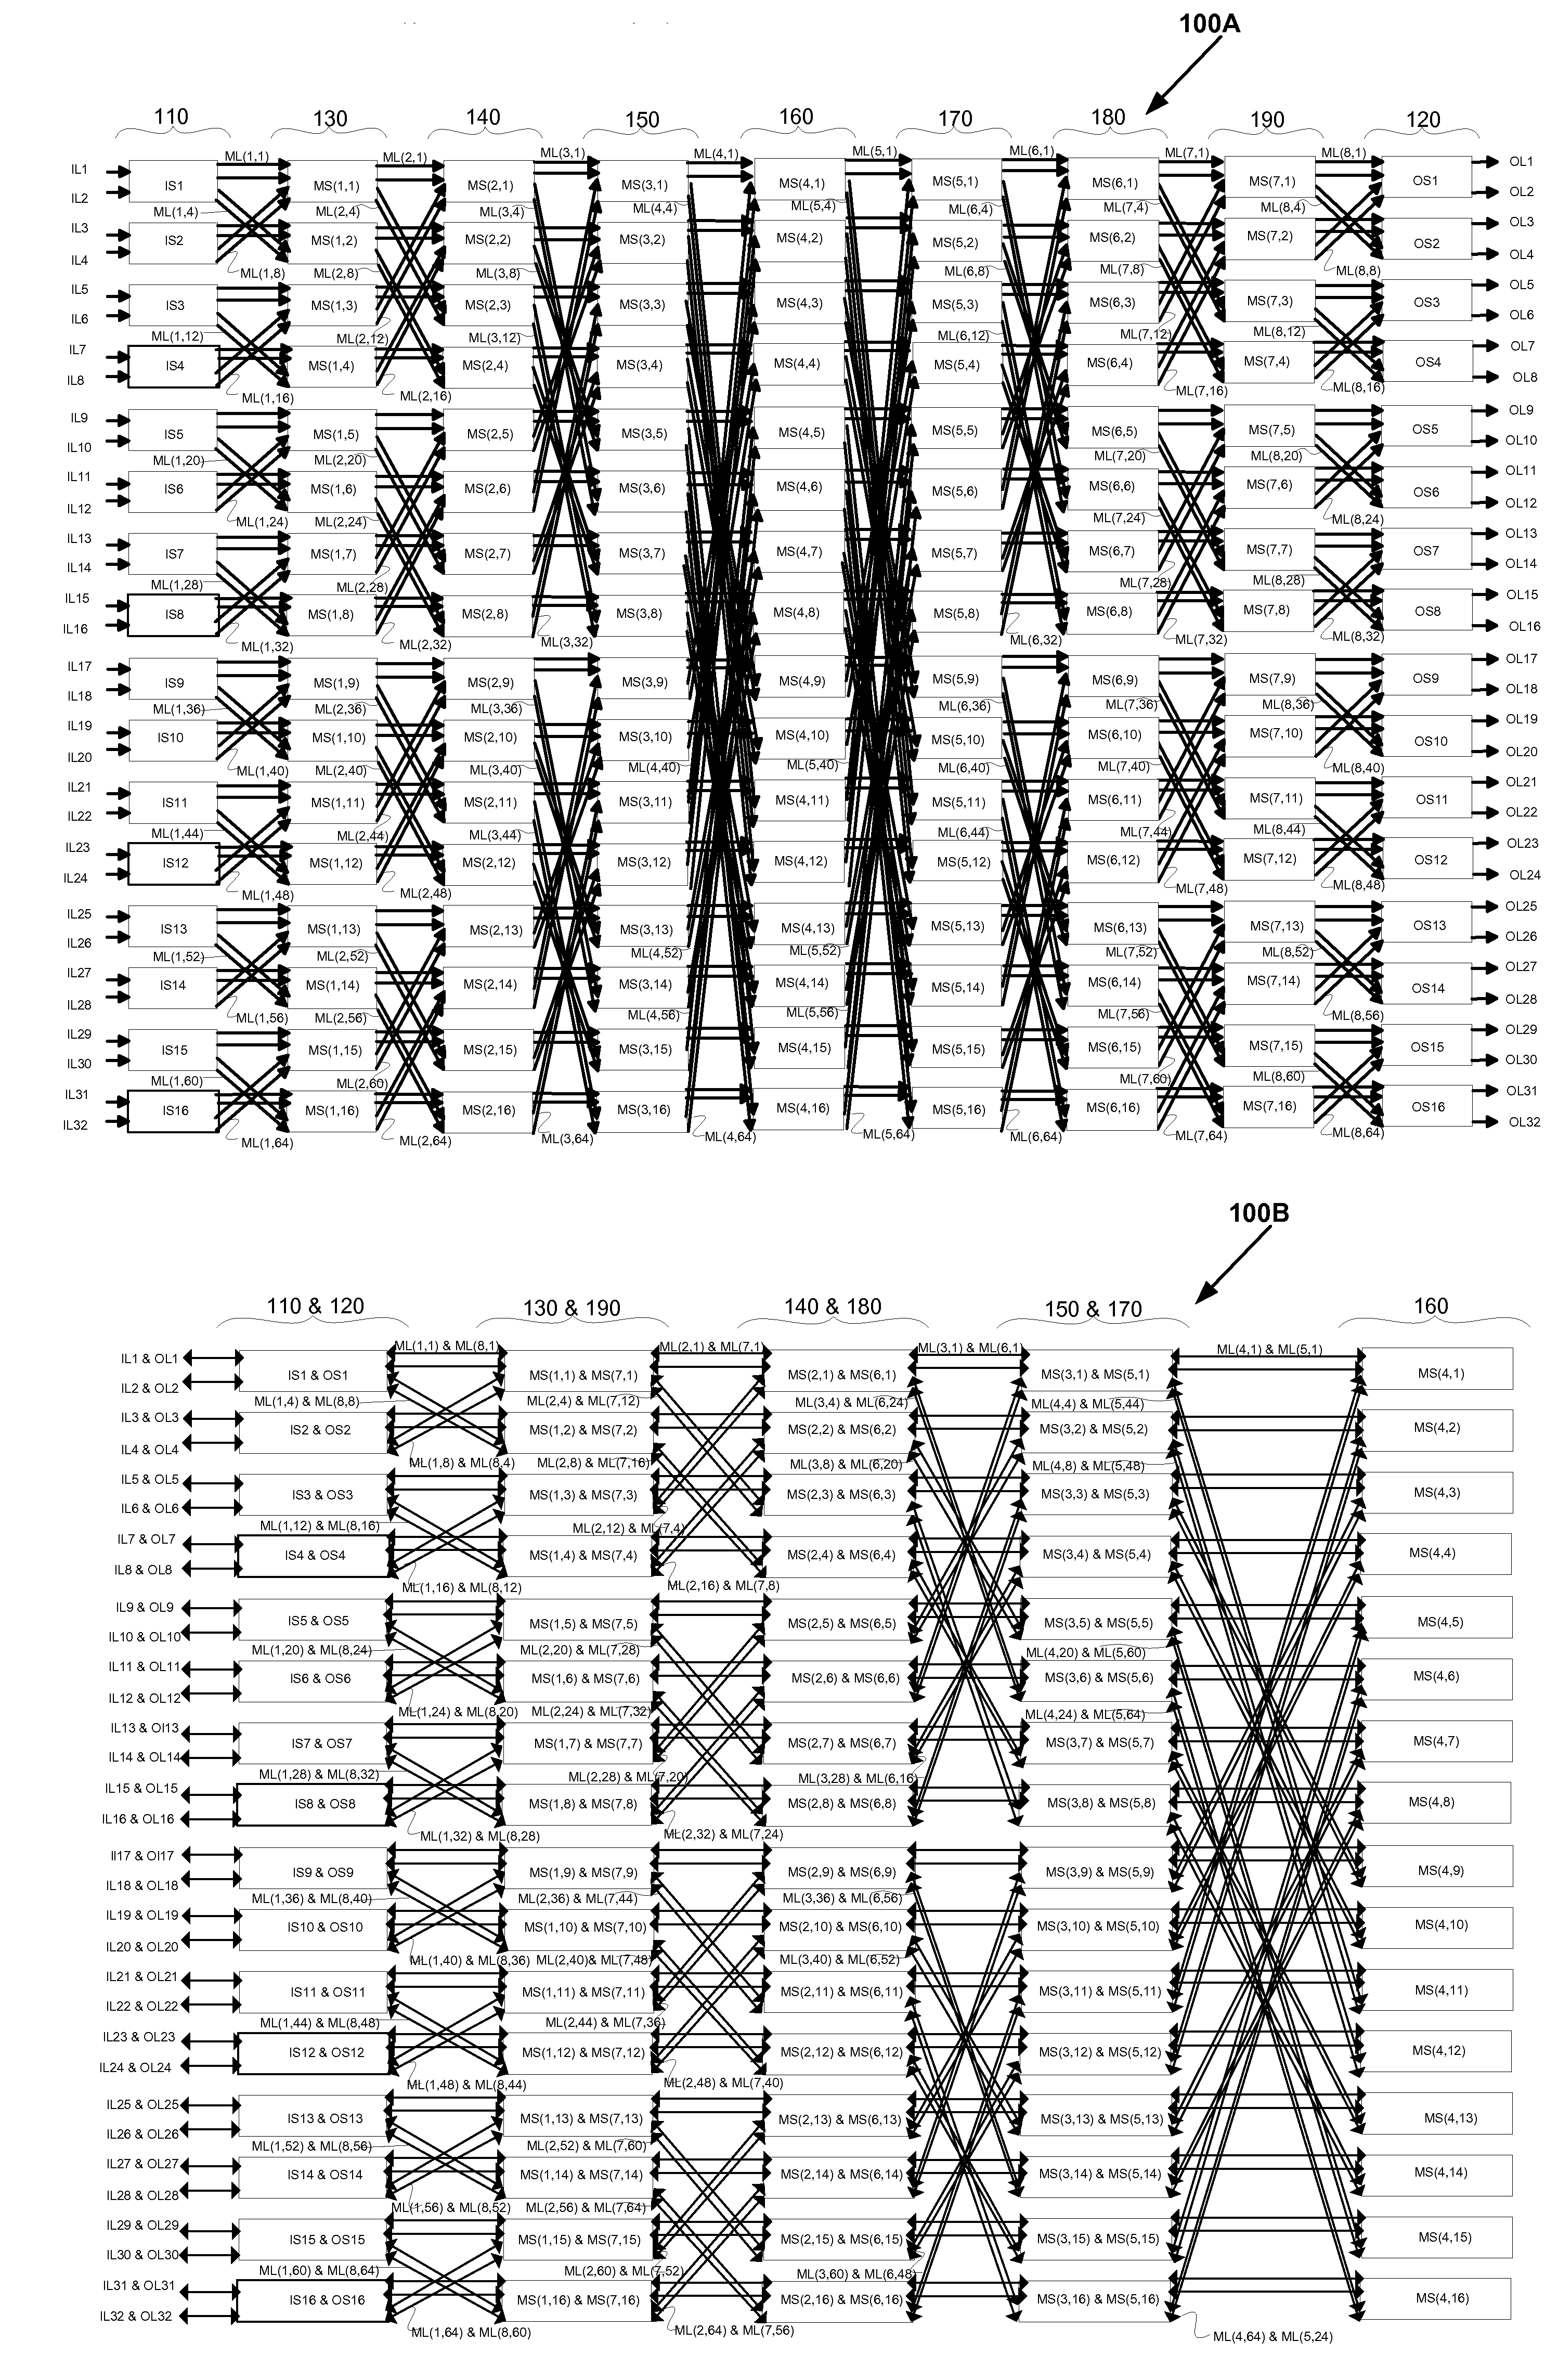 VLSI Layouts of Fully Connected Generalized and Pyramid Networks with Locality Exploitation